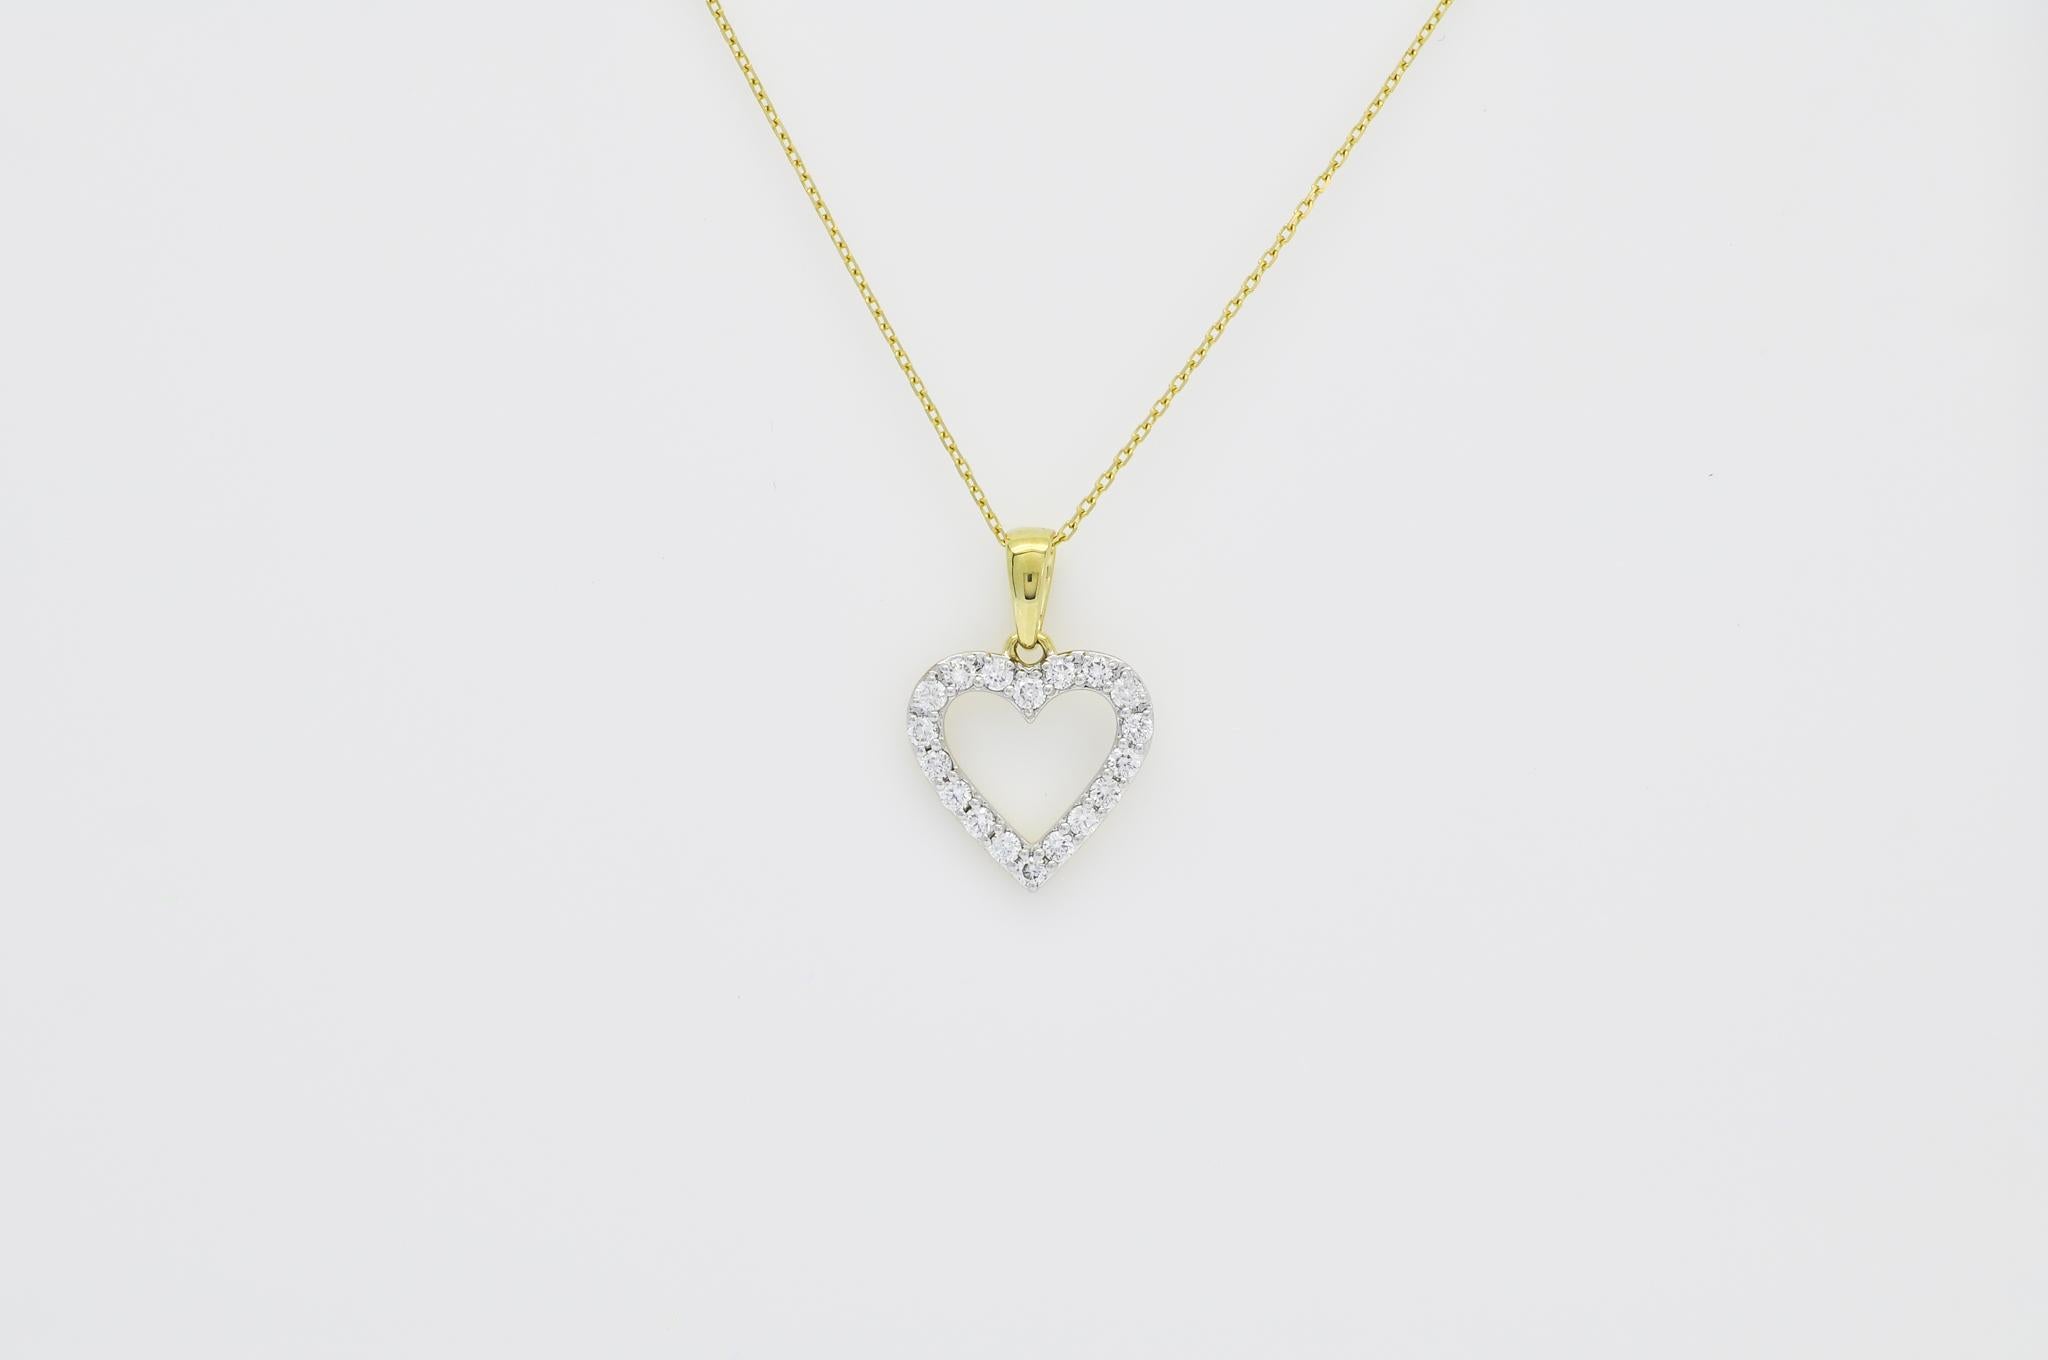 Natural Diamond 0.35 cts 18 Karat White Gold  Heart Pendant Chain Necklace For Sale 2